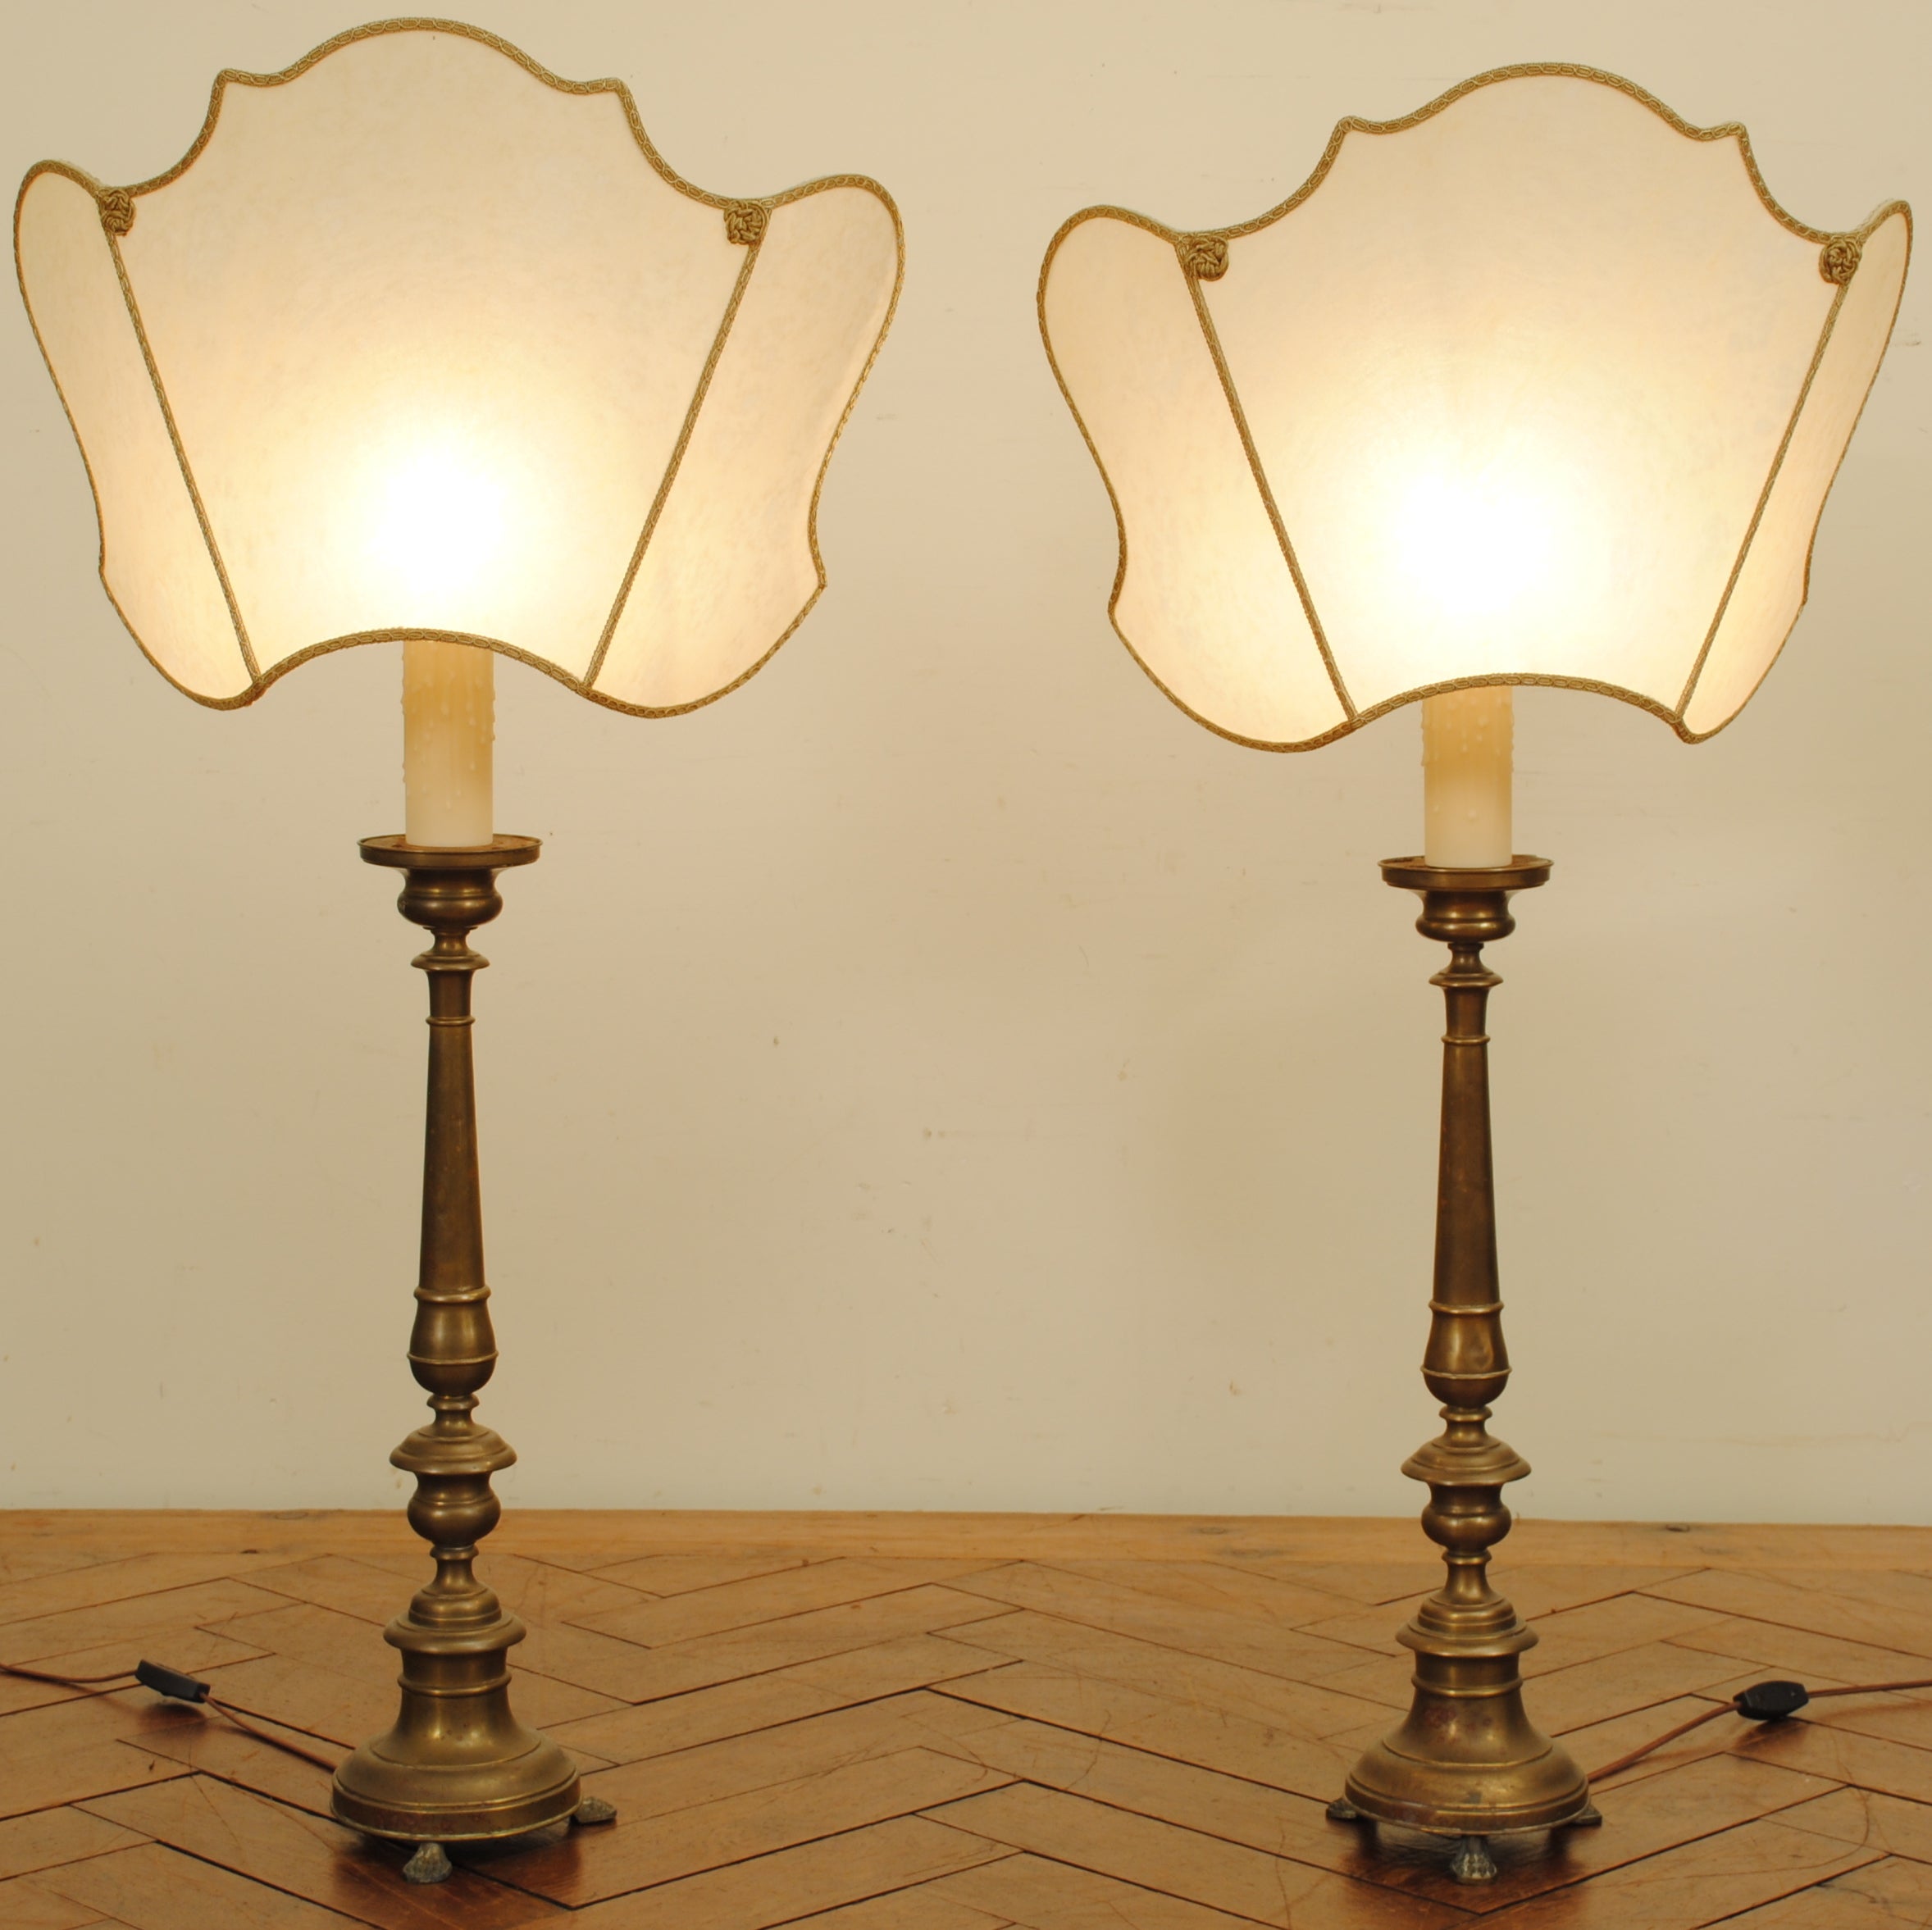 A Pair of Early 19th Century Italian Brass Pricket Table Lamps